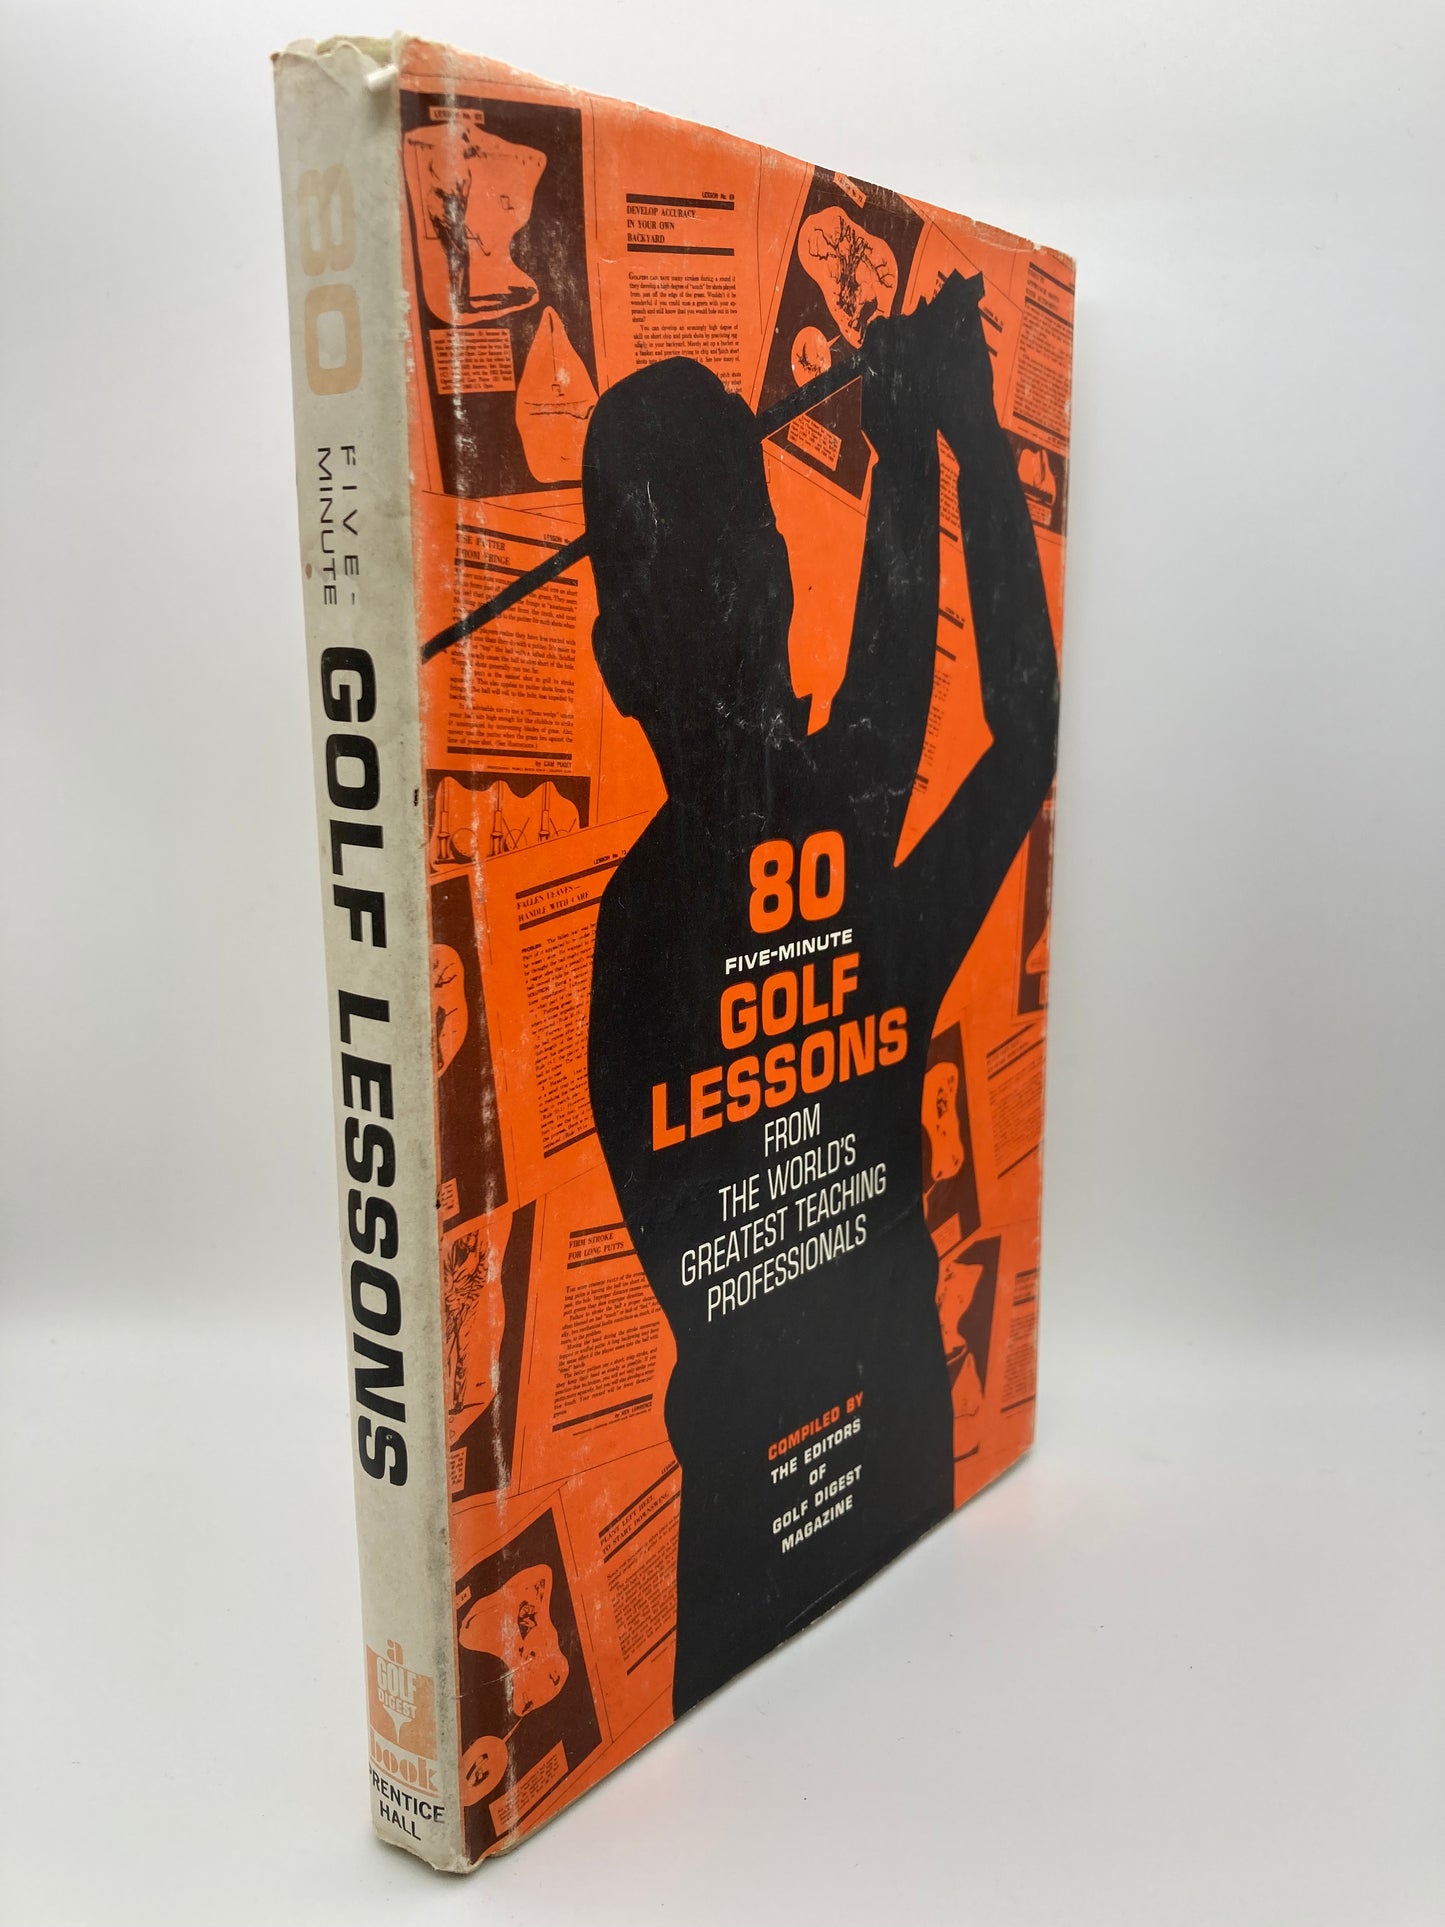 80 Five-Minute Golf Lessons from the World's Greatest Teaching Professionals